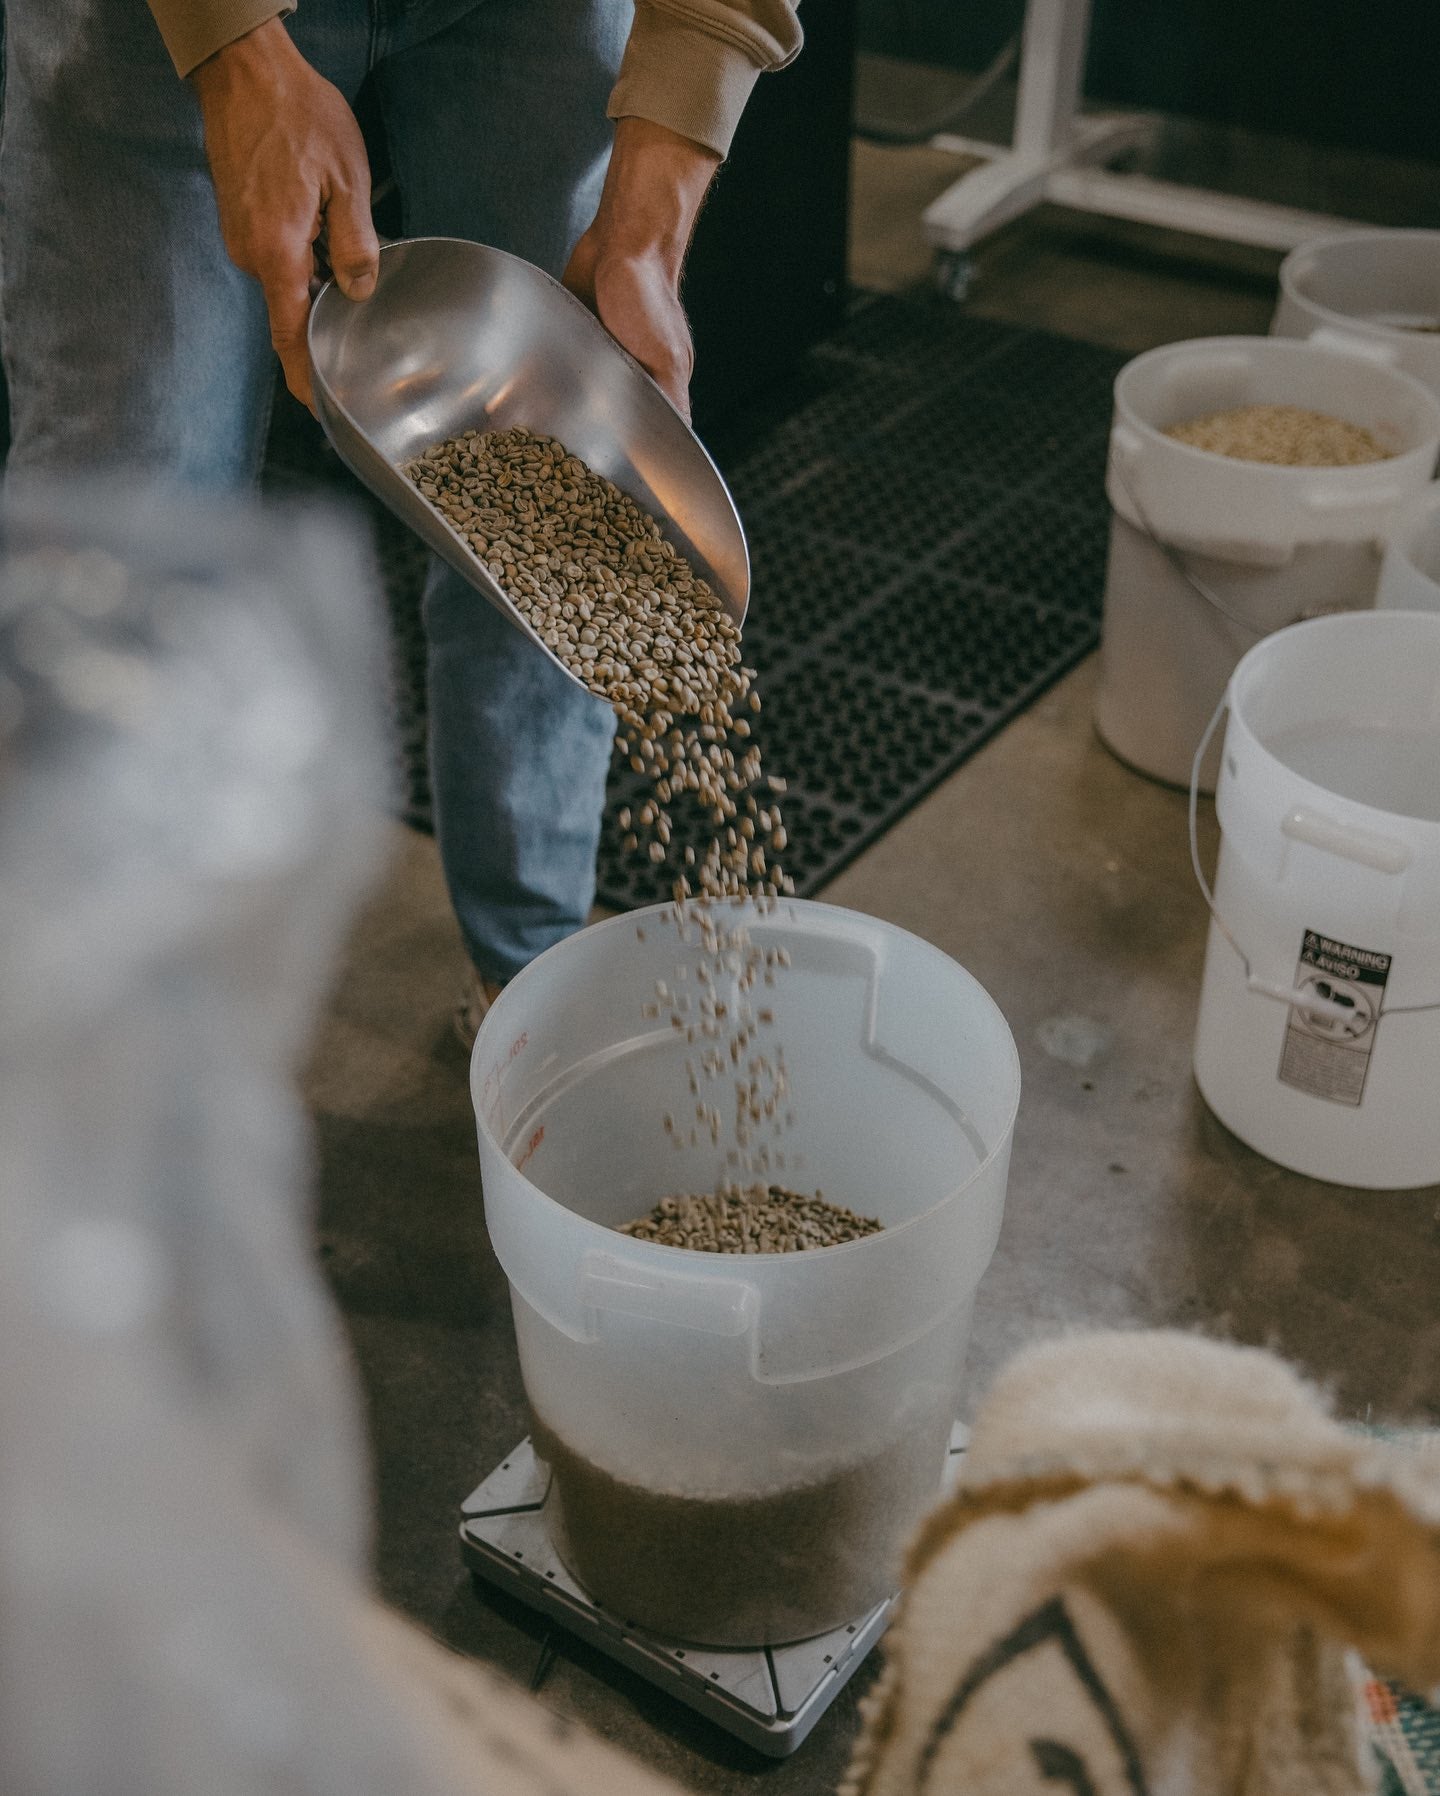 Image of coffee being poured into a bucket before the roasting process.